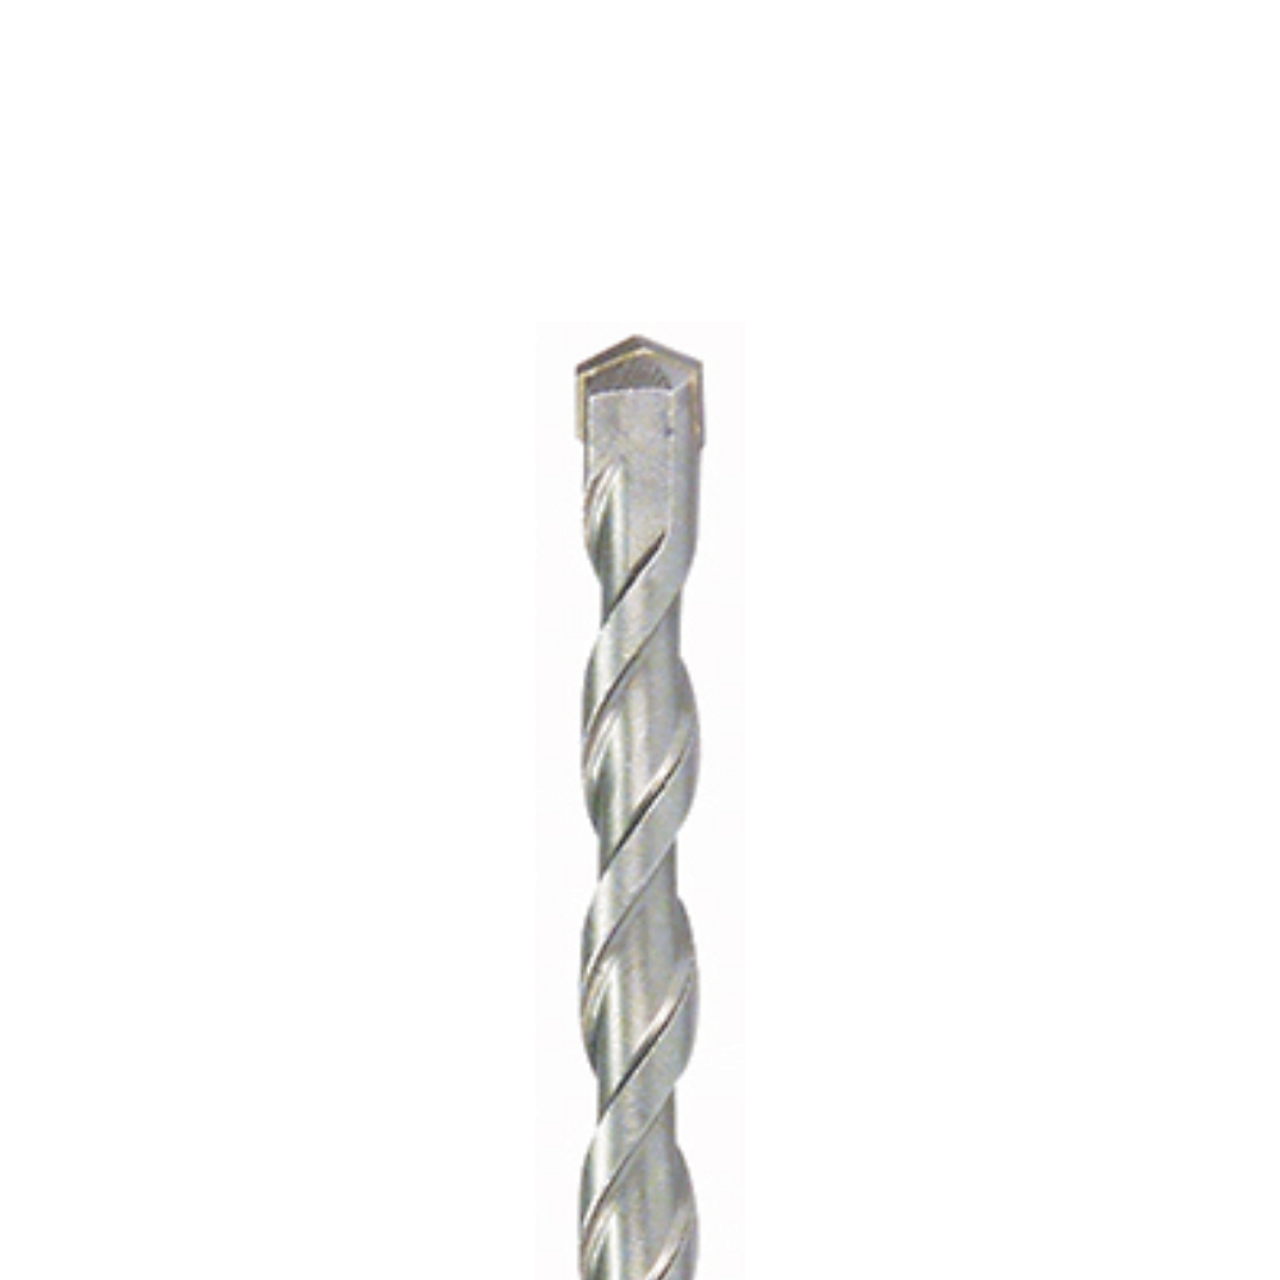 BOHRCRAFT Drill Bits | 2590 ECO Hammer Drill Bits for 200mm Depth for SDS-Plus